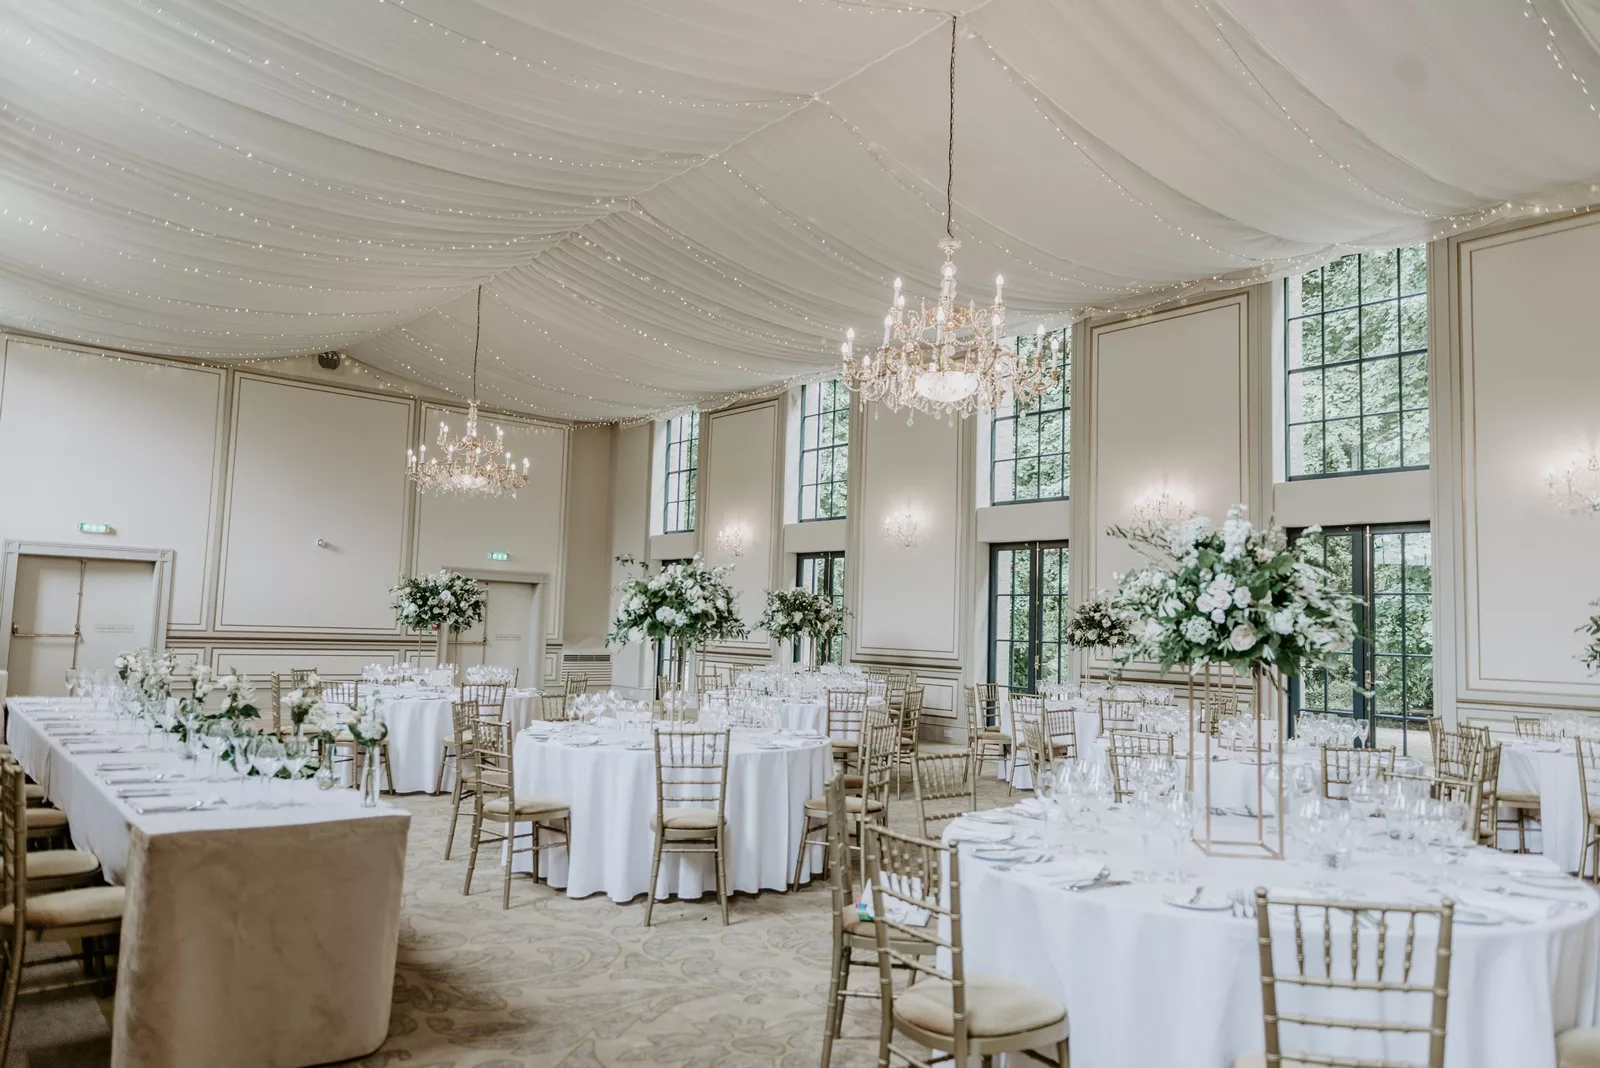 Dine Venues | Rise Hall | Wedding Venue with accommodation | Yorkshire wedding